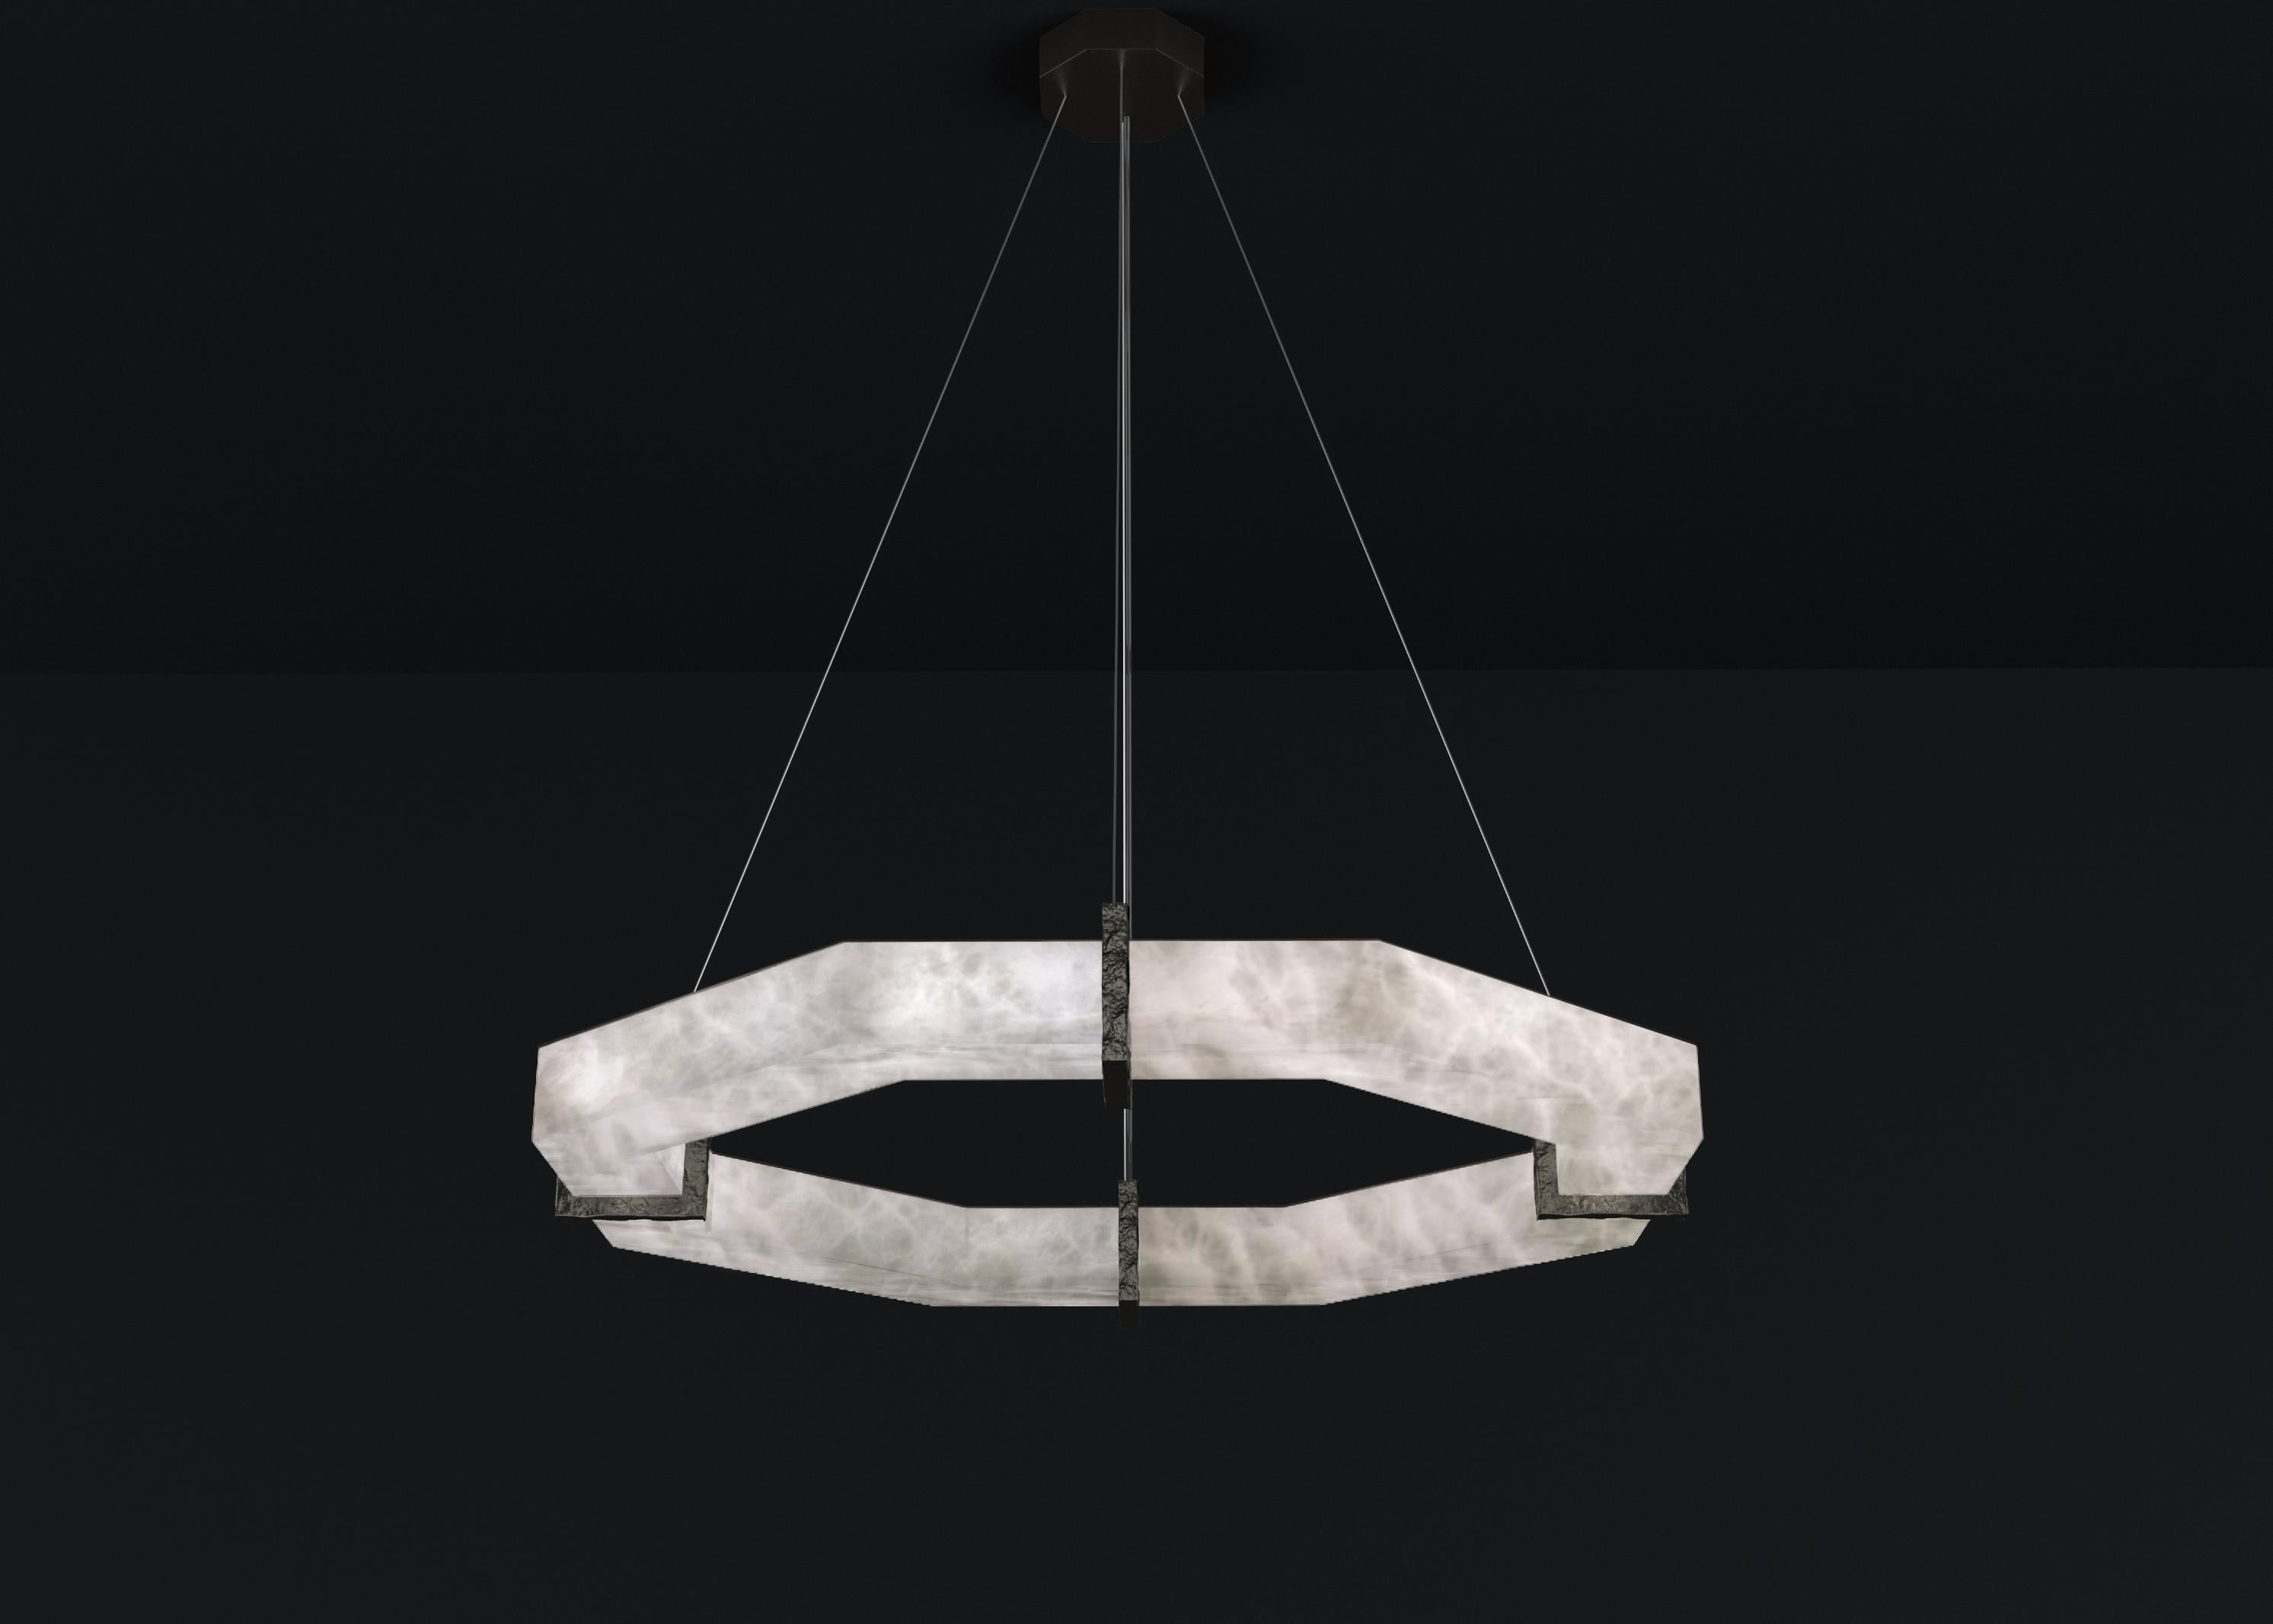 Efesto Brushed Black Metal Pendant Lamp by Alabastro Italiano
Dimensions: D 83 x W 80 x H 11 cm.
Materials: White alabaster and metal.

Available in different finishes: Shiny Silver, Bronze, Brushed Brass, Ruggine of Florence, Brushed Burnished,